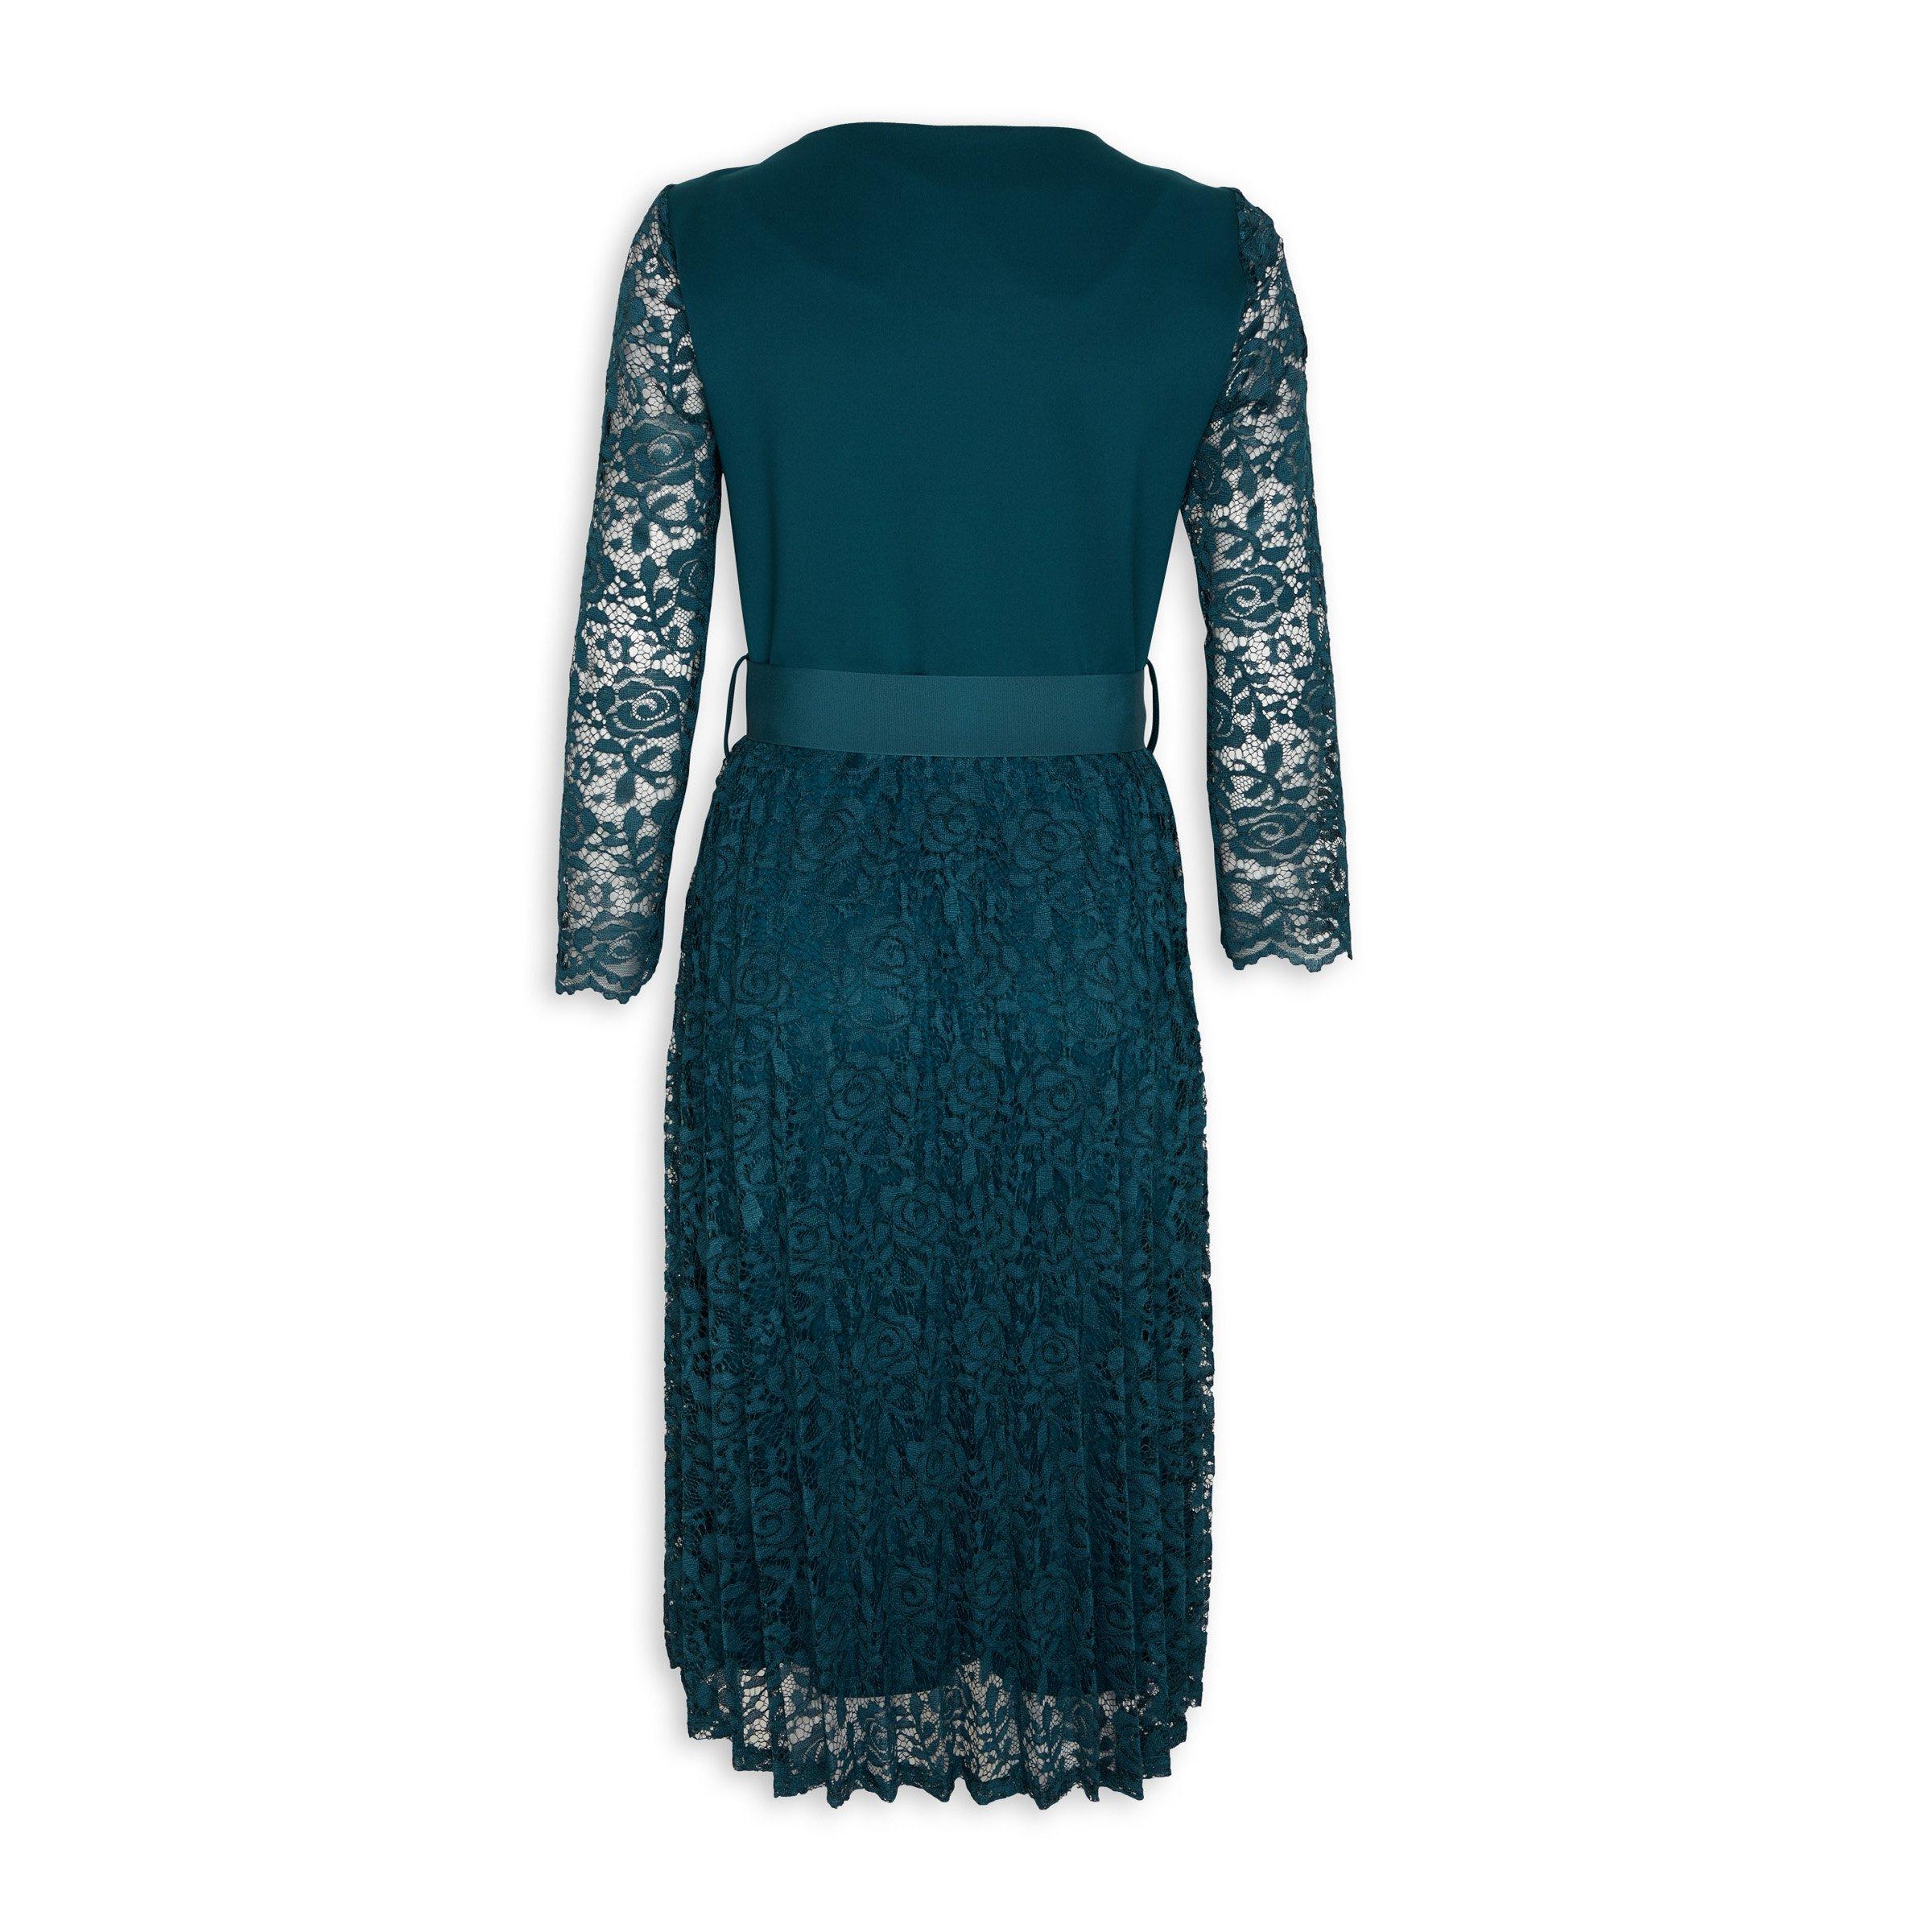 Teal Lace Combo Dress (3061336)